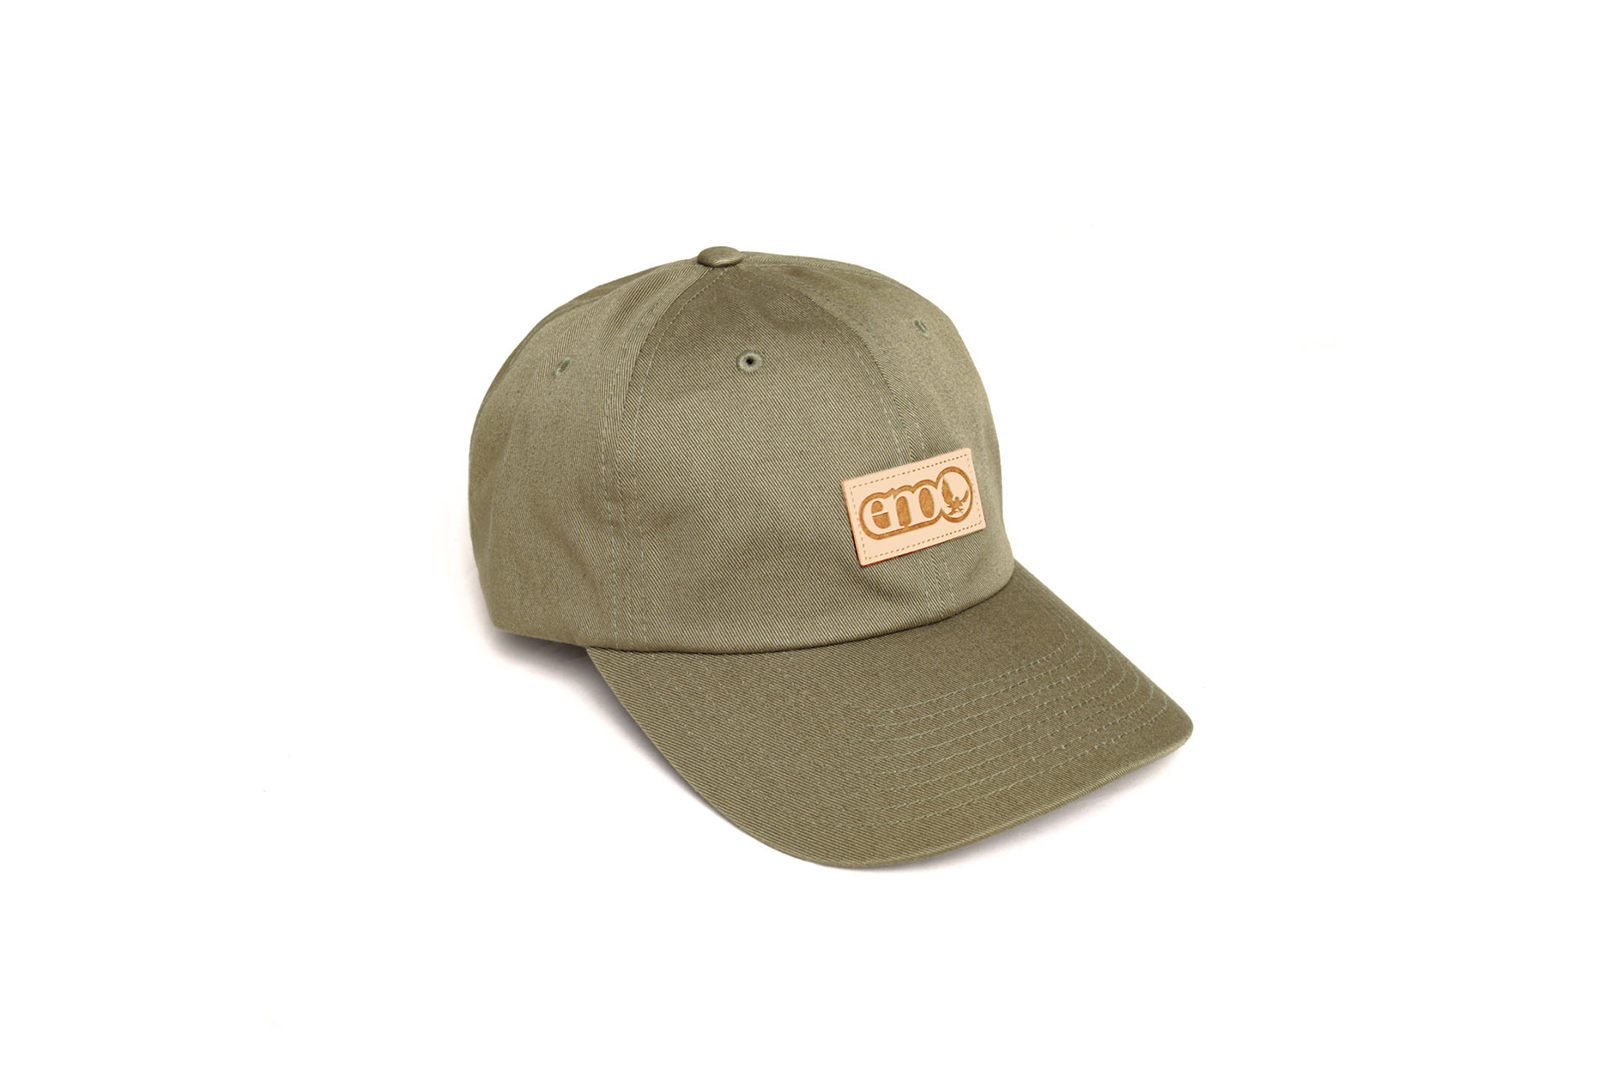 Eagles Nest Outfitters Accessories, ENO Classic Hat